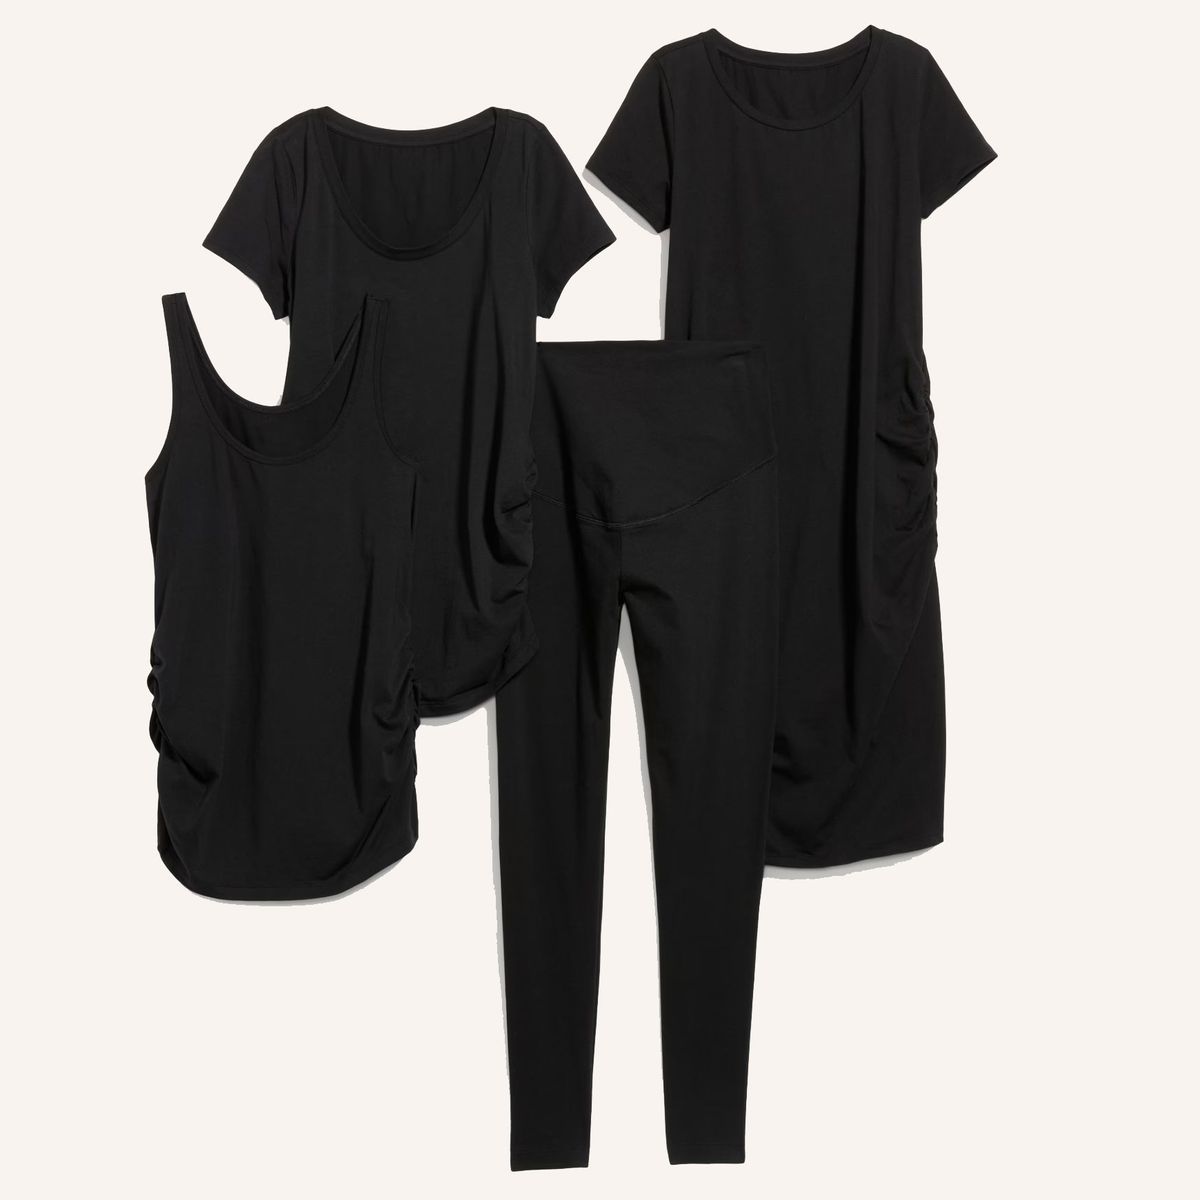 Old Navy Maternity 4-Piece Essentials Kit